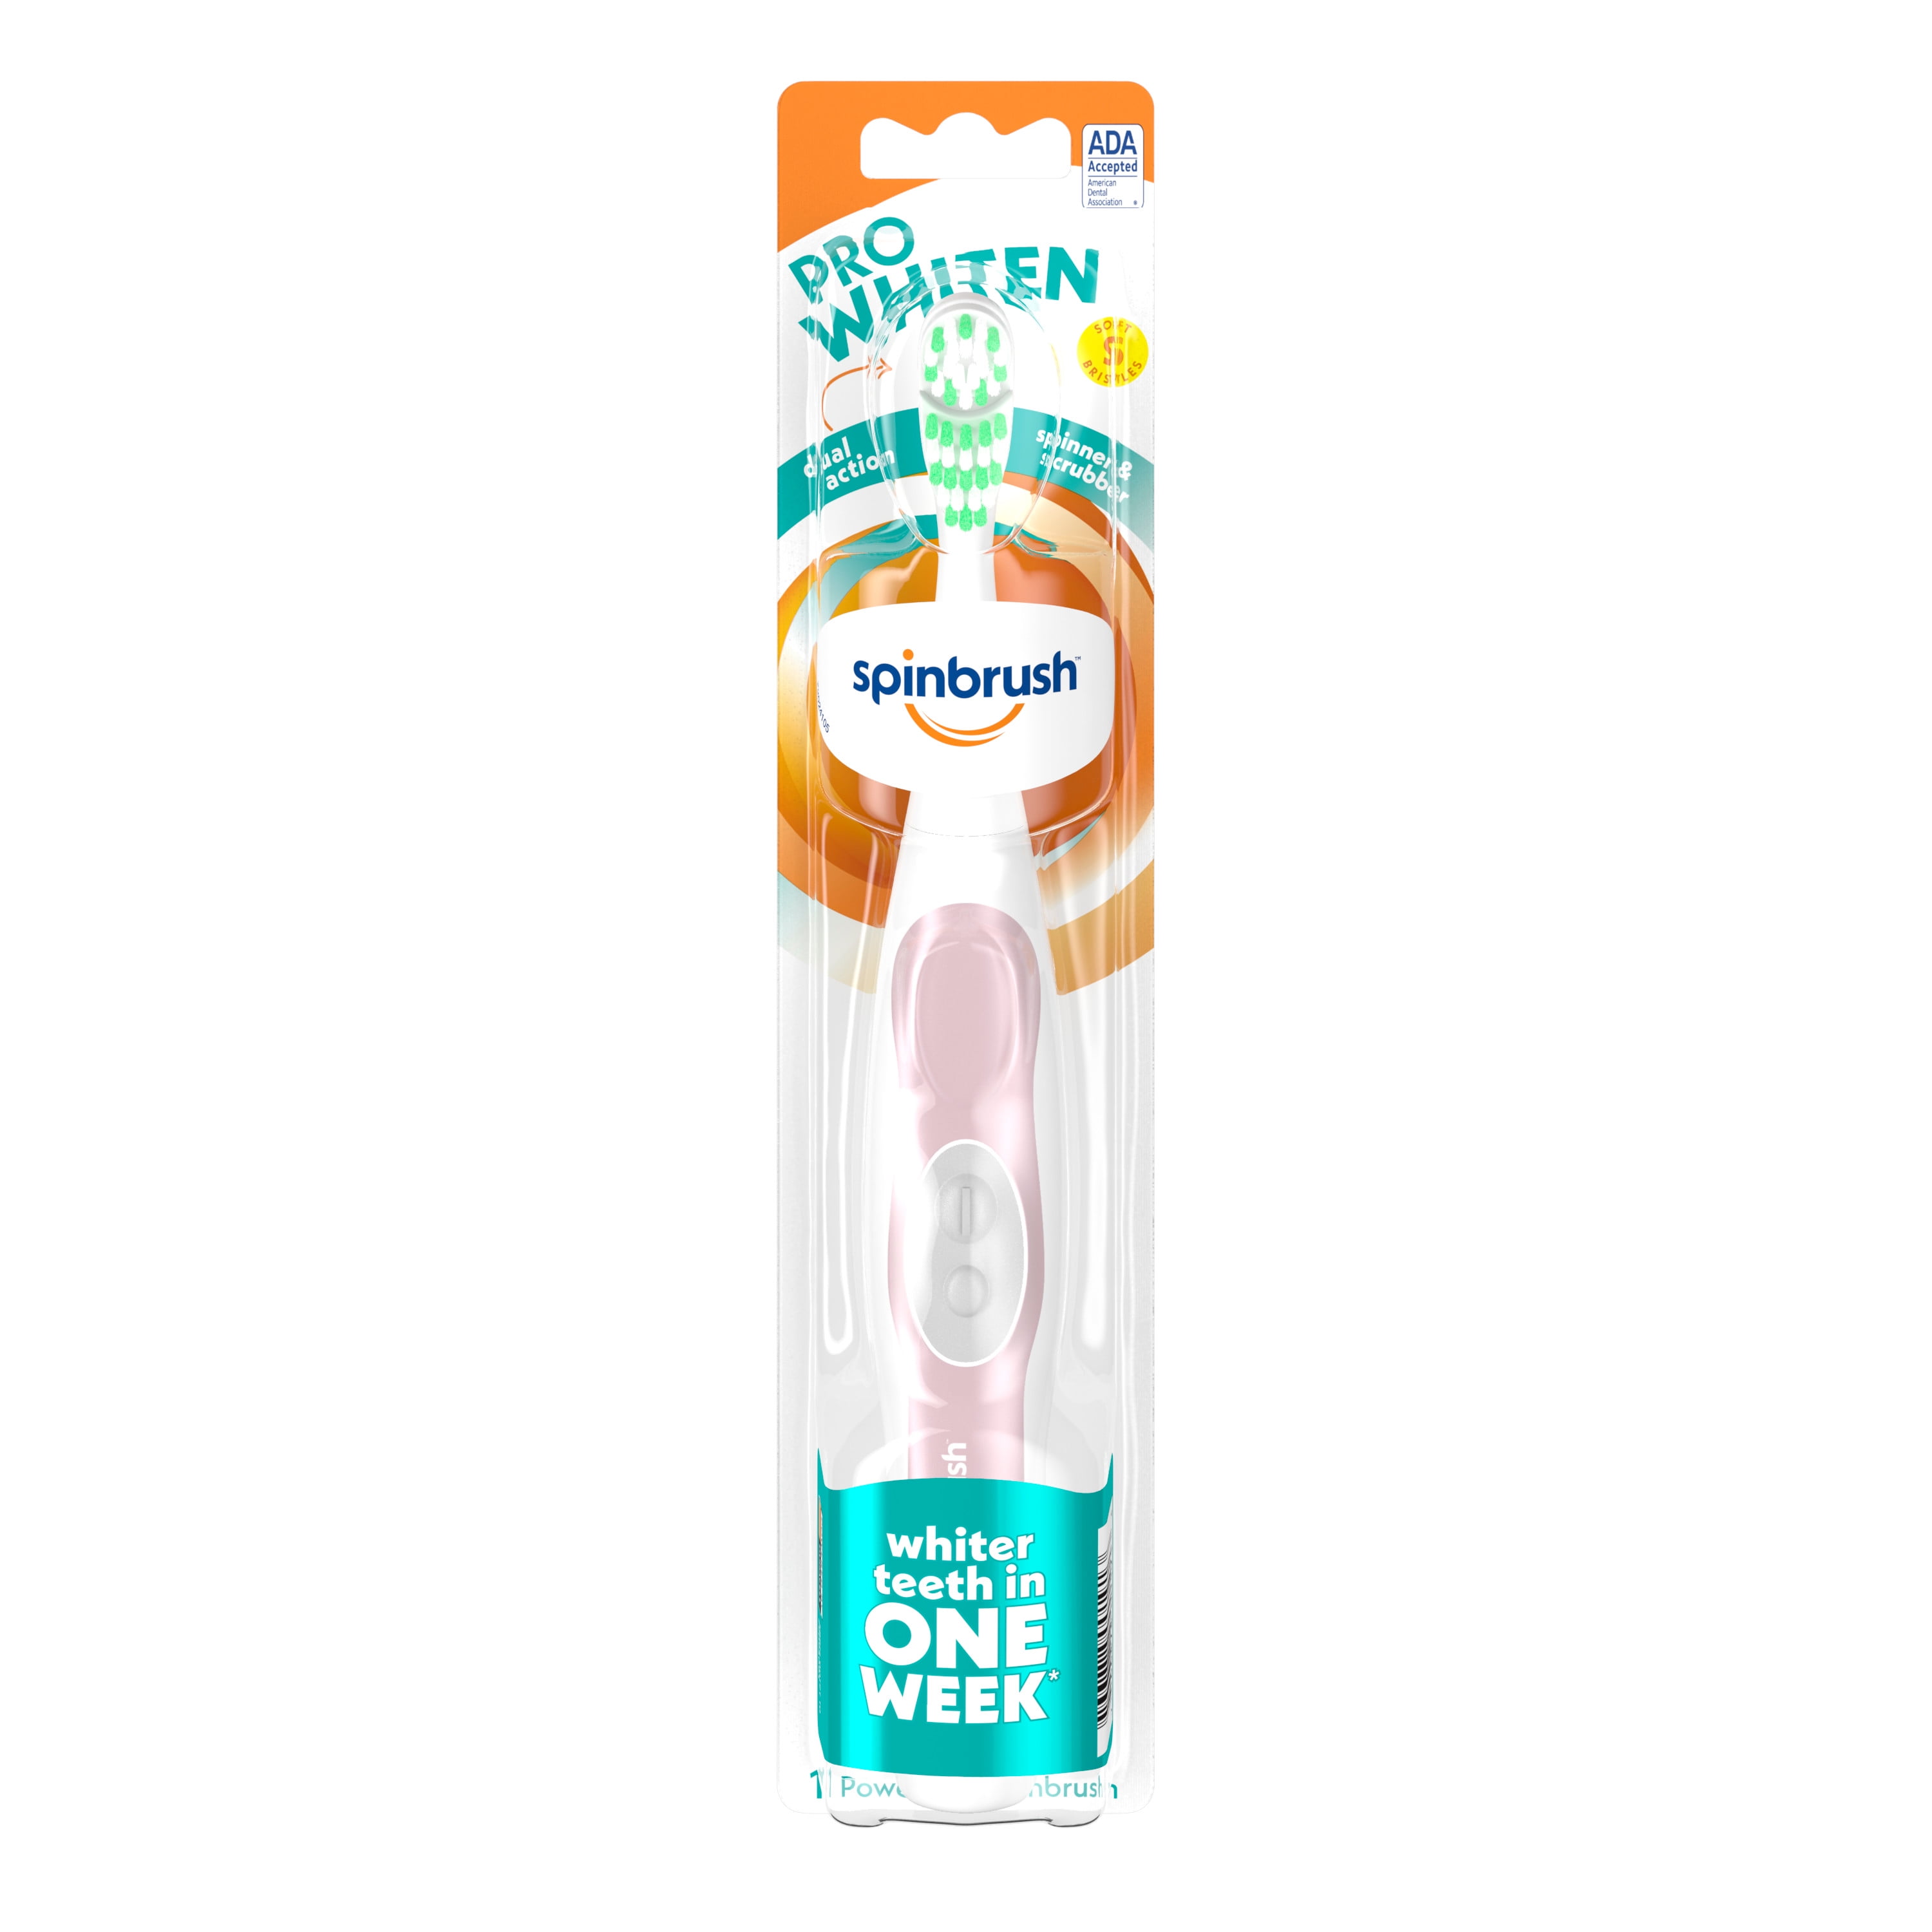 Spinbrush PRO WHITEN Battery Powered Toothbrush, Soft Bristles, 1 Count, Rose Gold or Silver Color May Vary